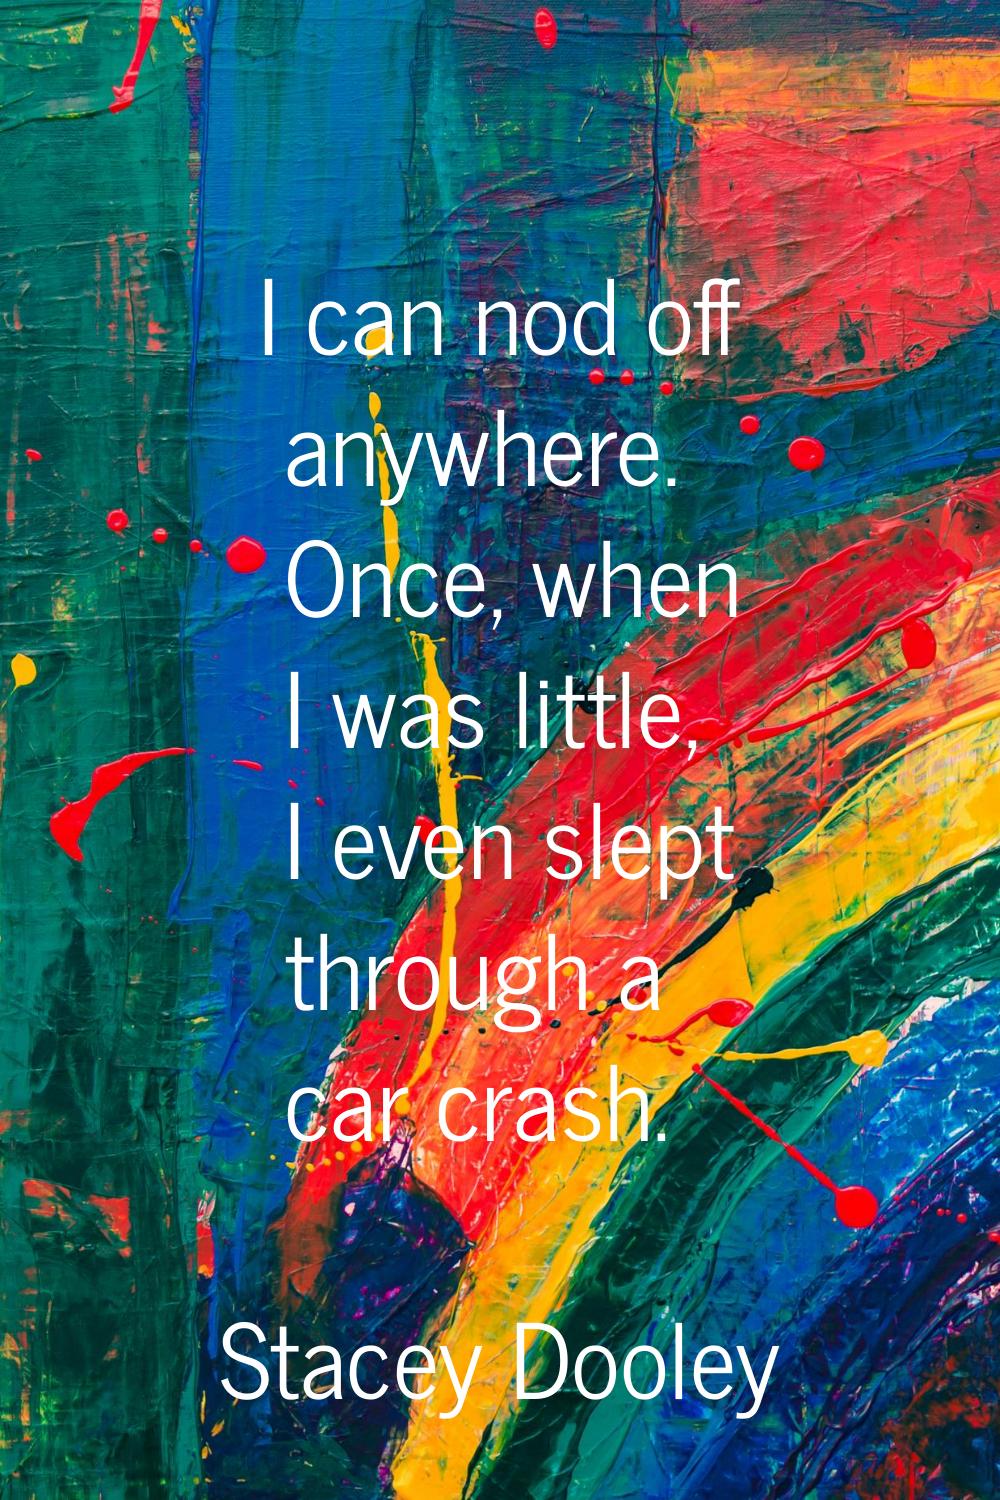 I can nod off anywhere. Once, when I was little, I even slept through a car crash.